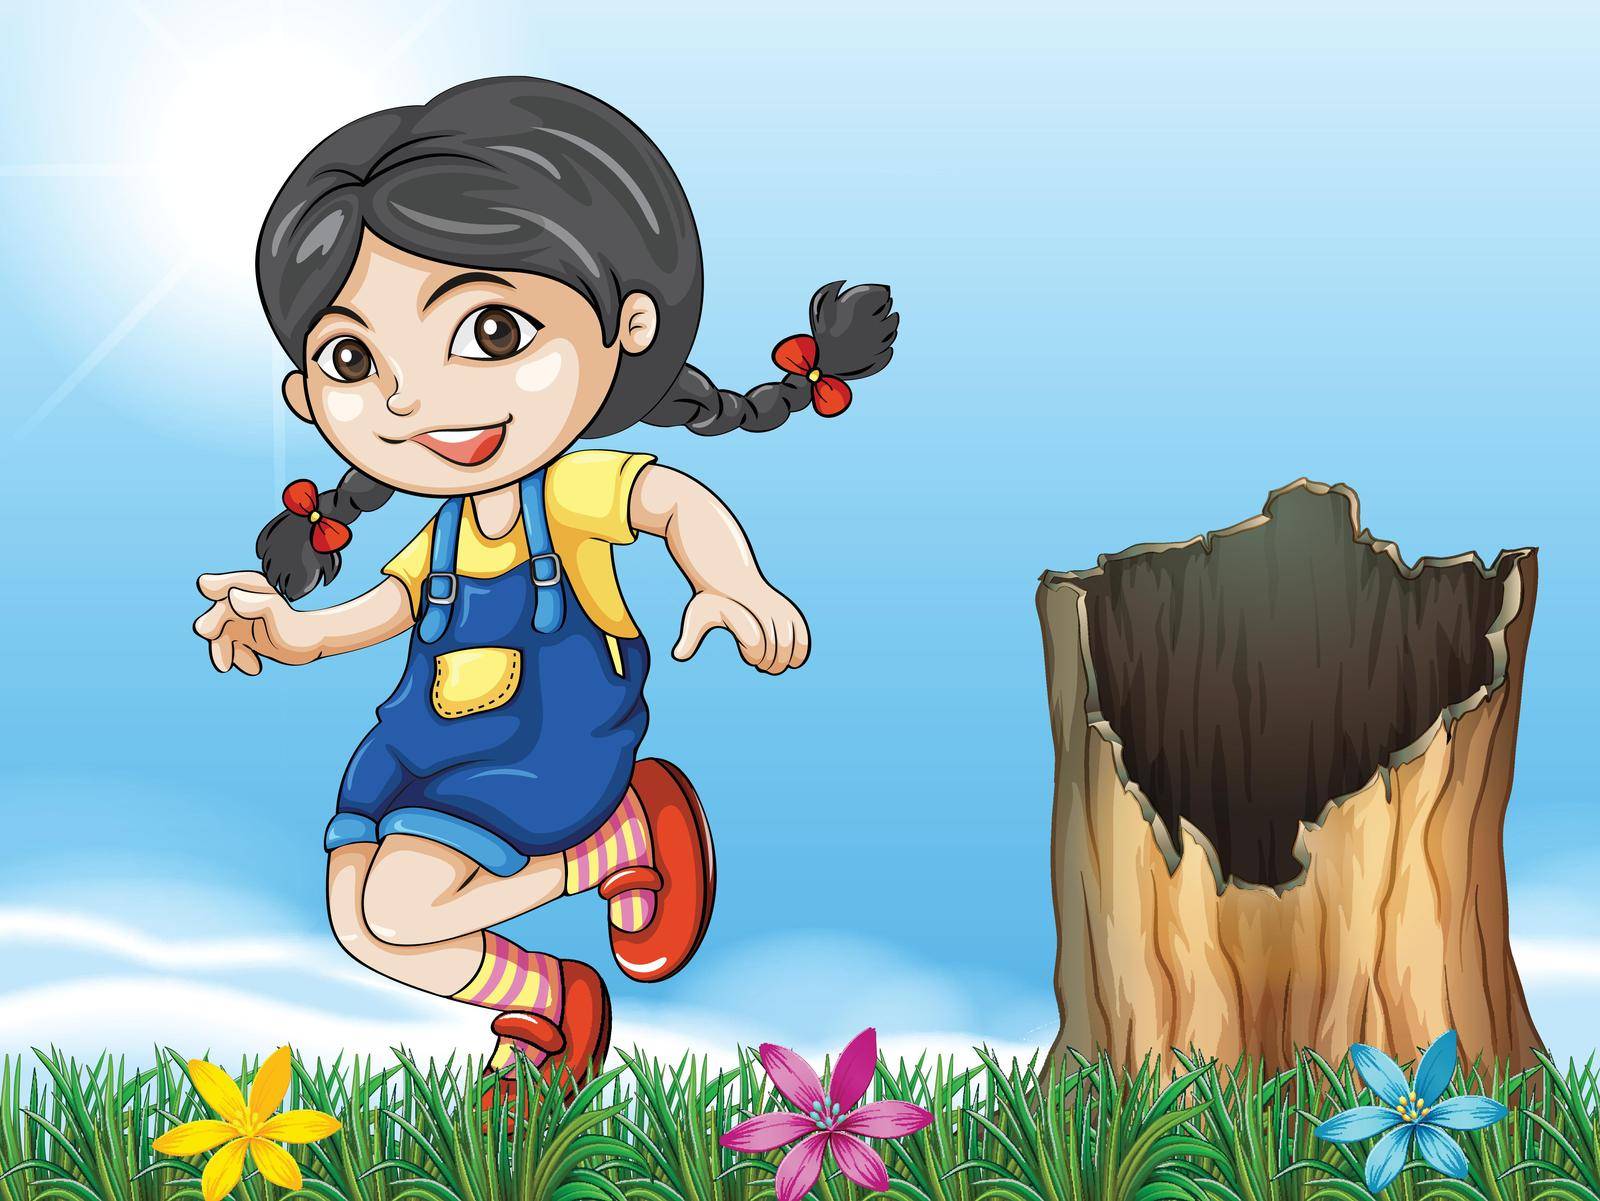 Illustration of a girl playing beside the stump